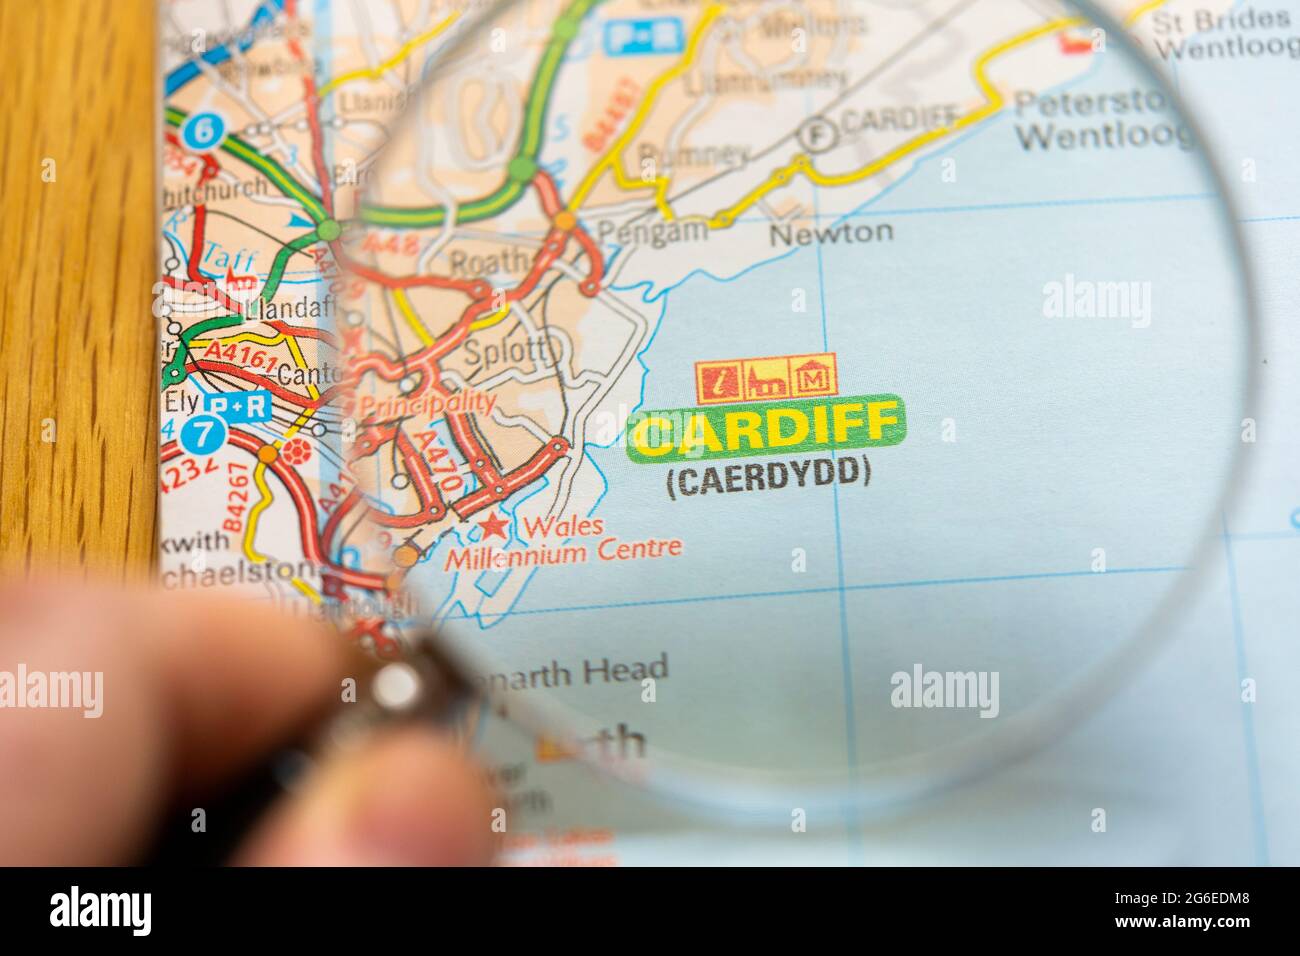 Closeup of a page in a printed road map atlas with a man's hand holding a magnifying glass showing an enlargement of Cardiff (Caerdydd) in Wales Stock Photo